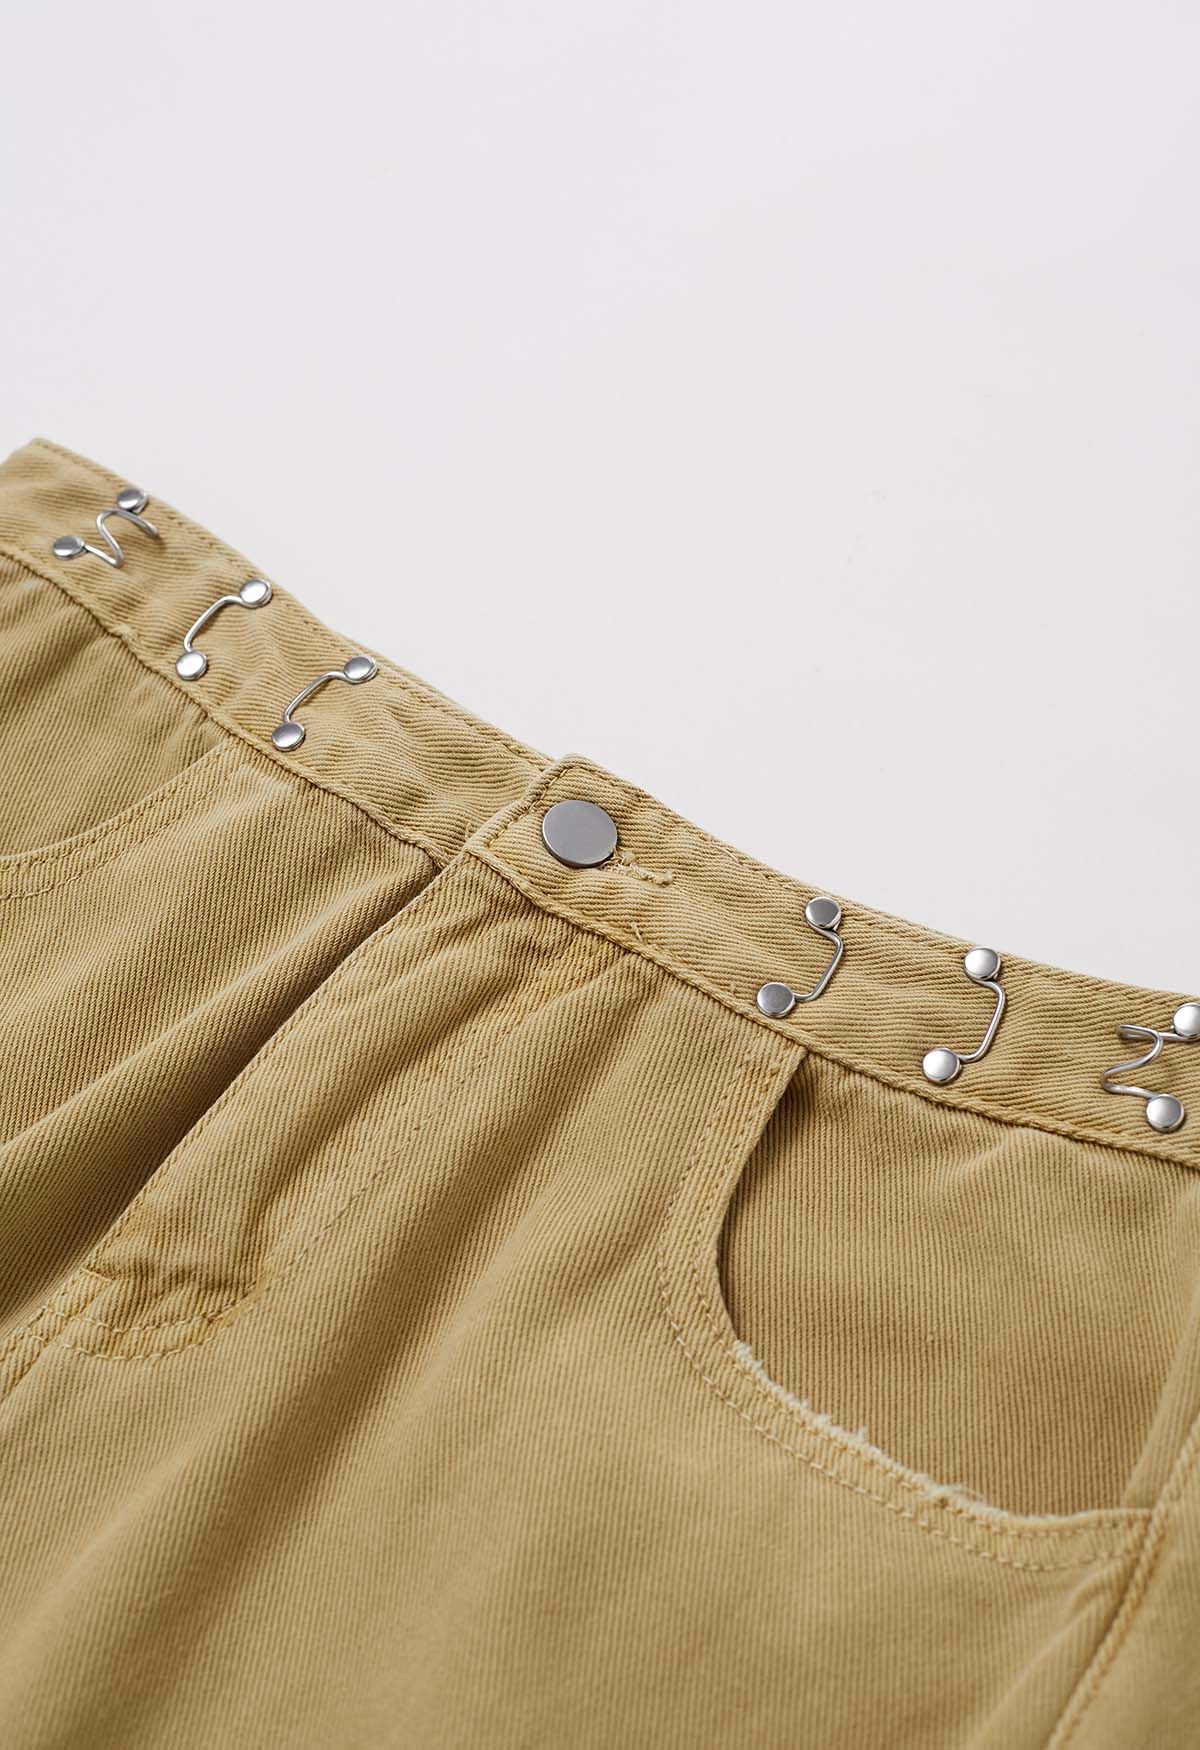 Ripped Details Straight Leg Jeans in Mustard